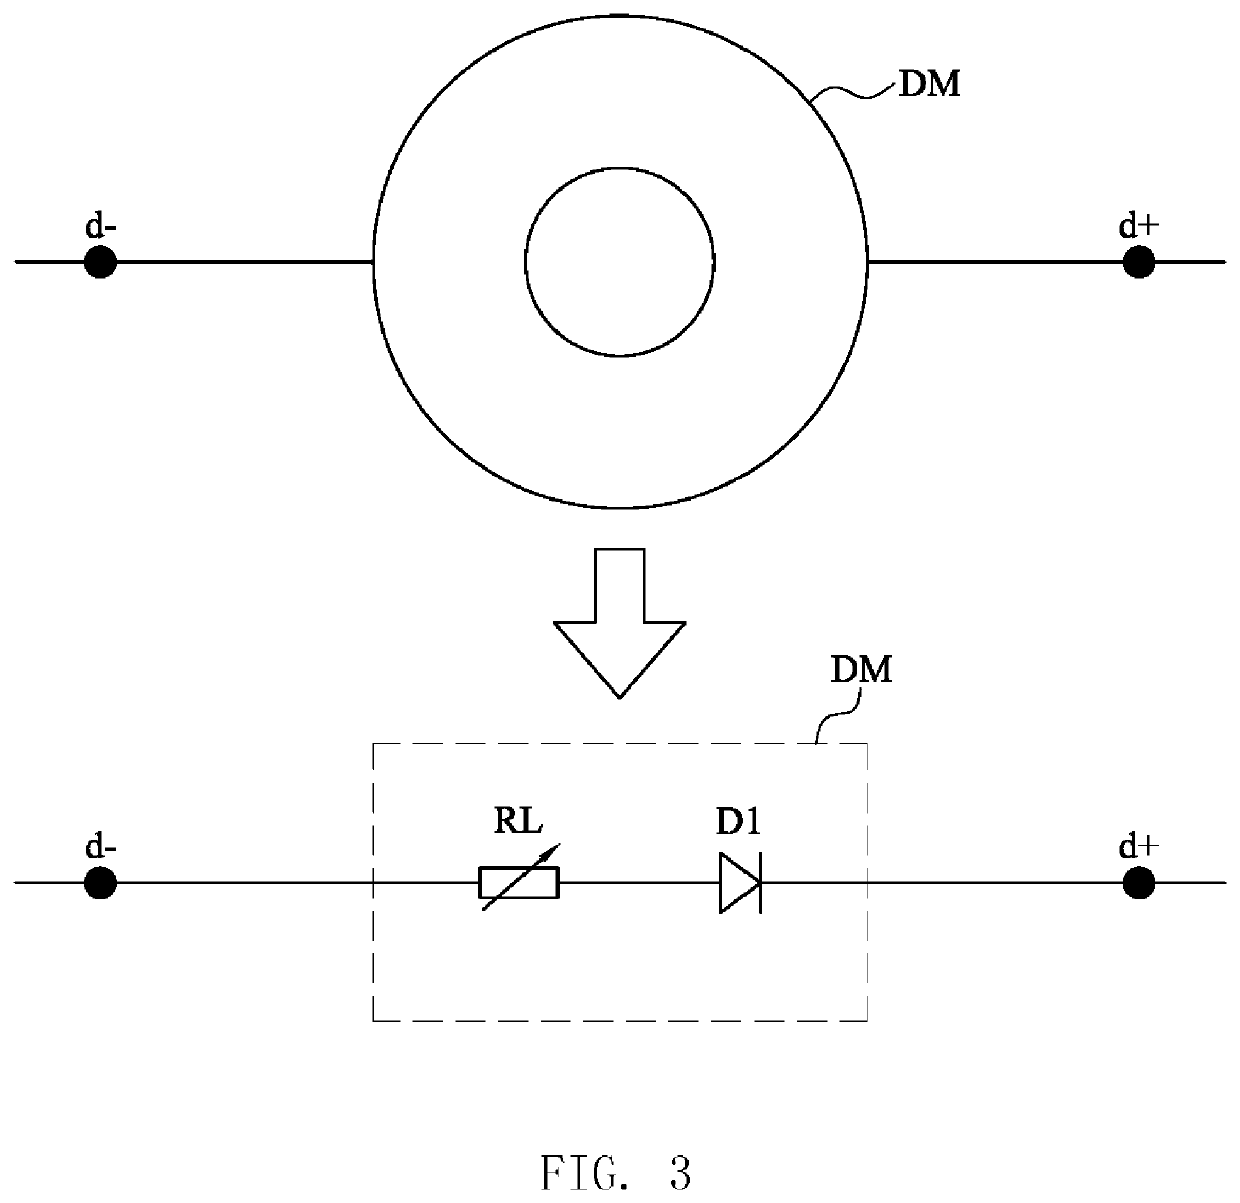 Polarity correction circuit for dimmer